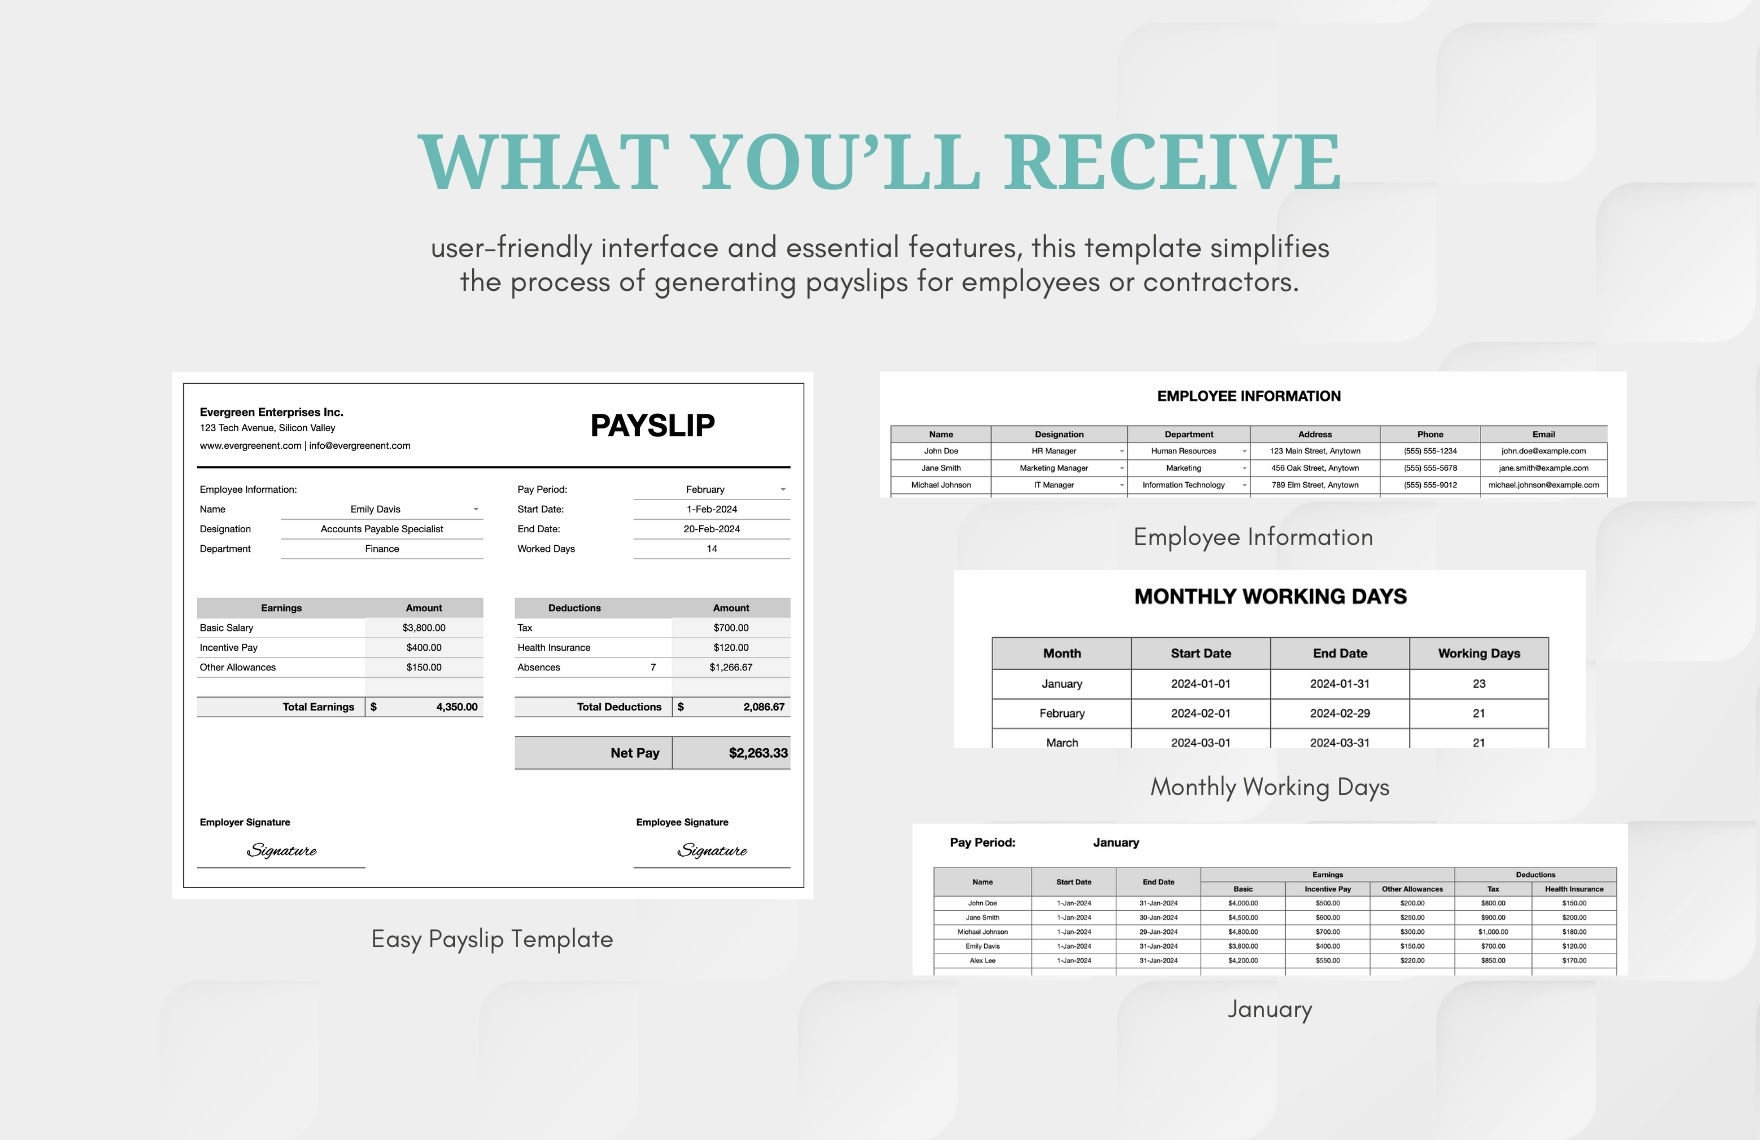 Easy Payslip Template